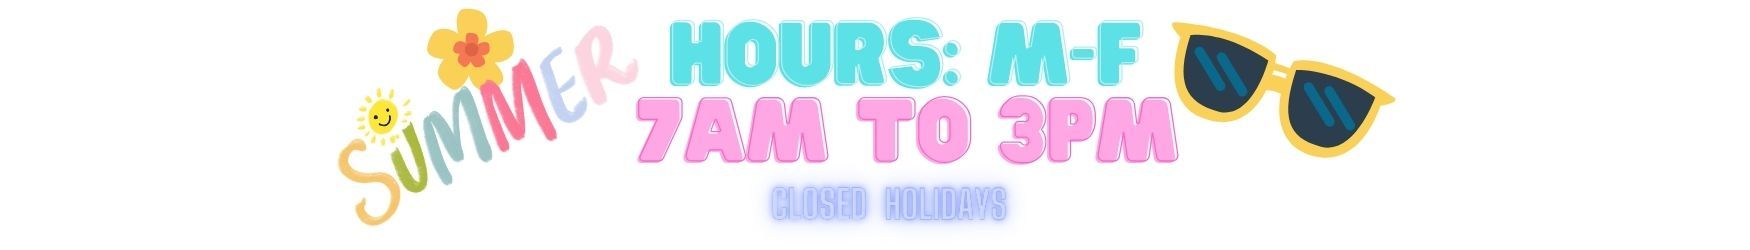 Summer Hours M-F 1-3 Closed Holidays